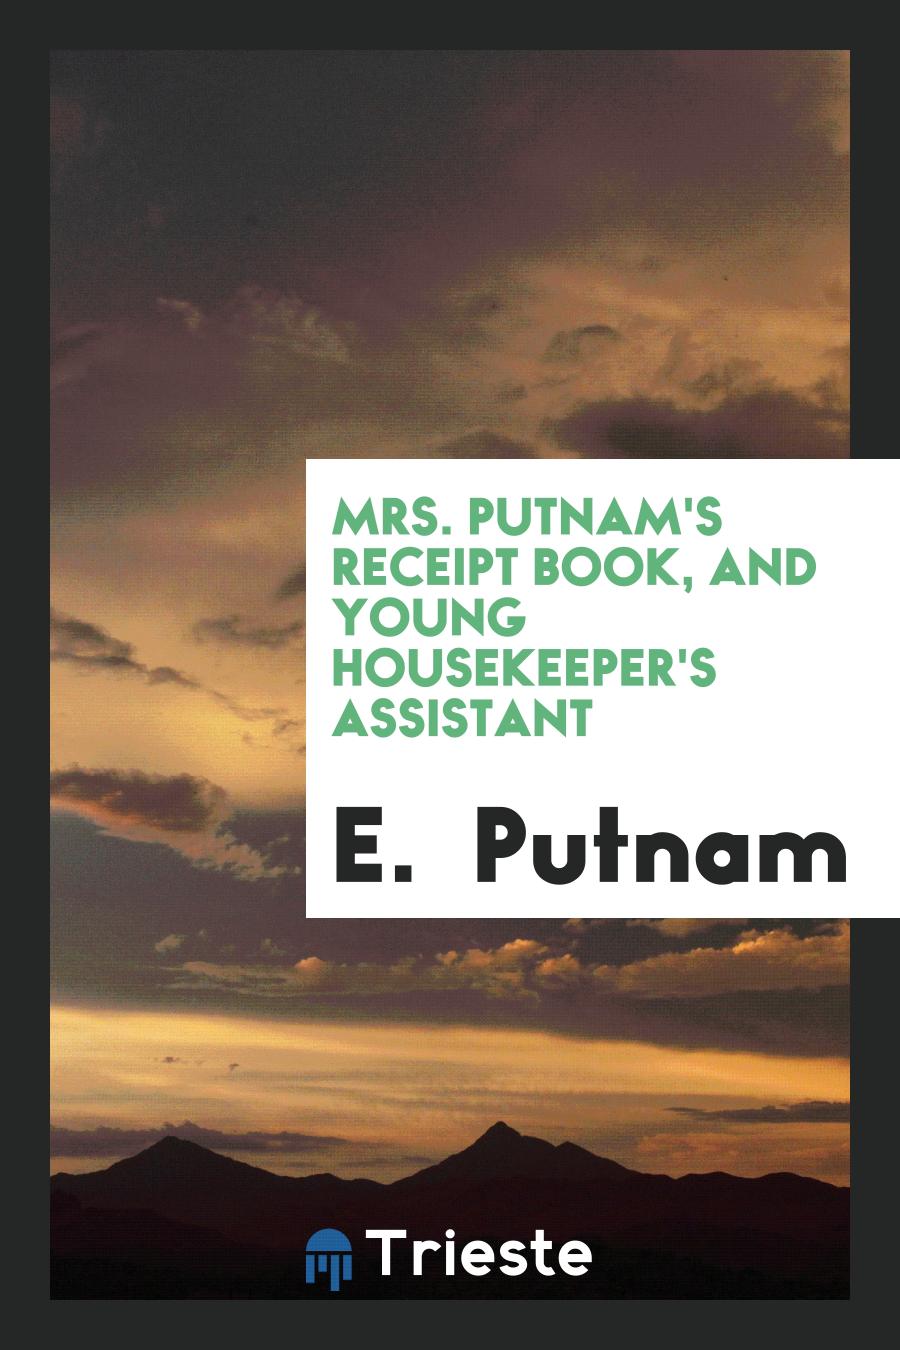 Mrs. Putnam's Receipt Book, and Young Housekeeper's Assistant